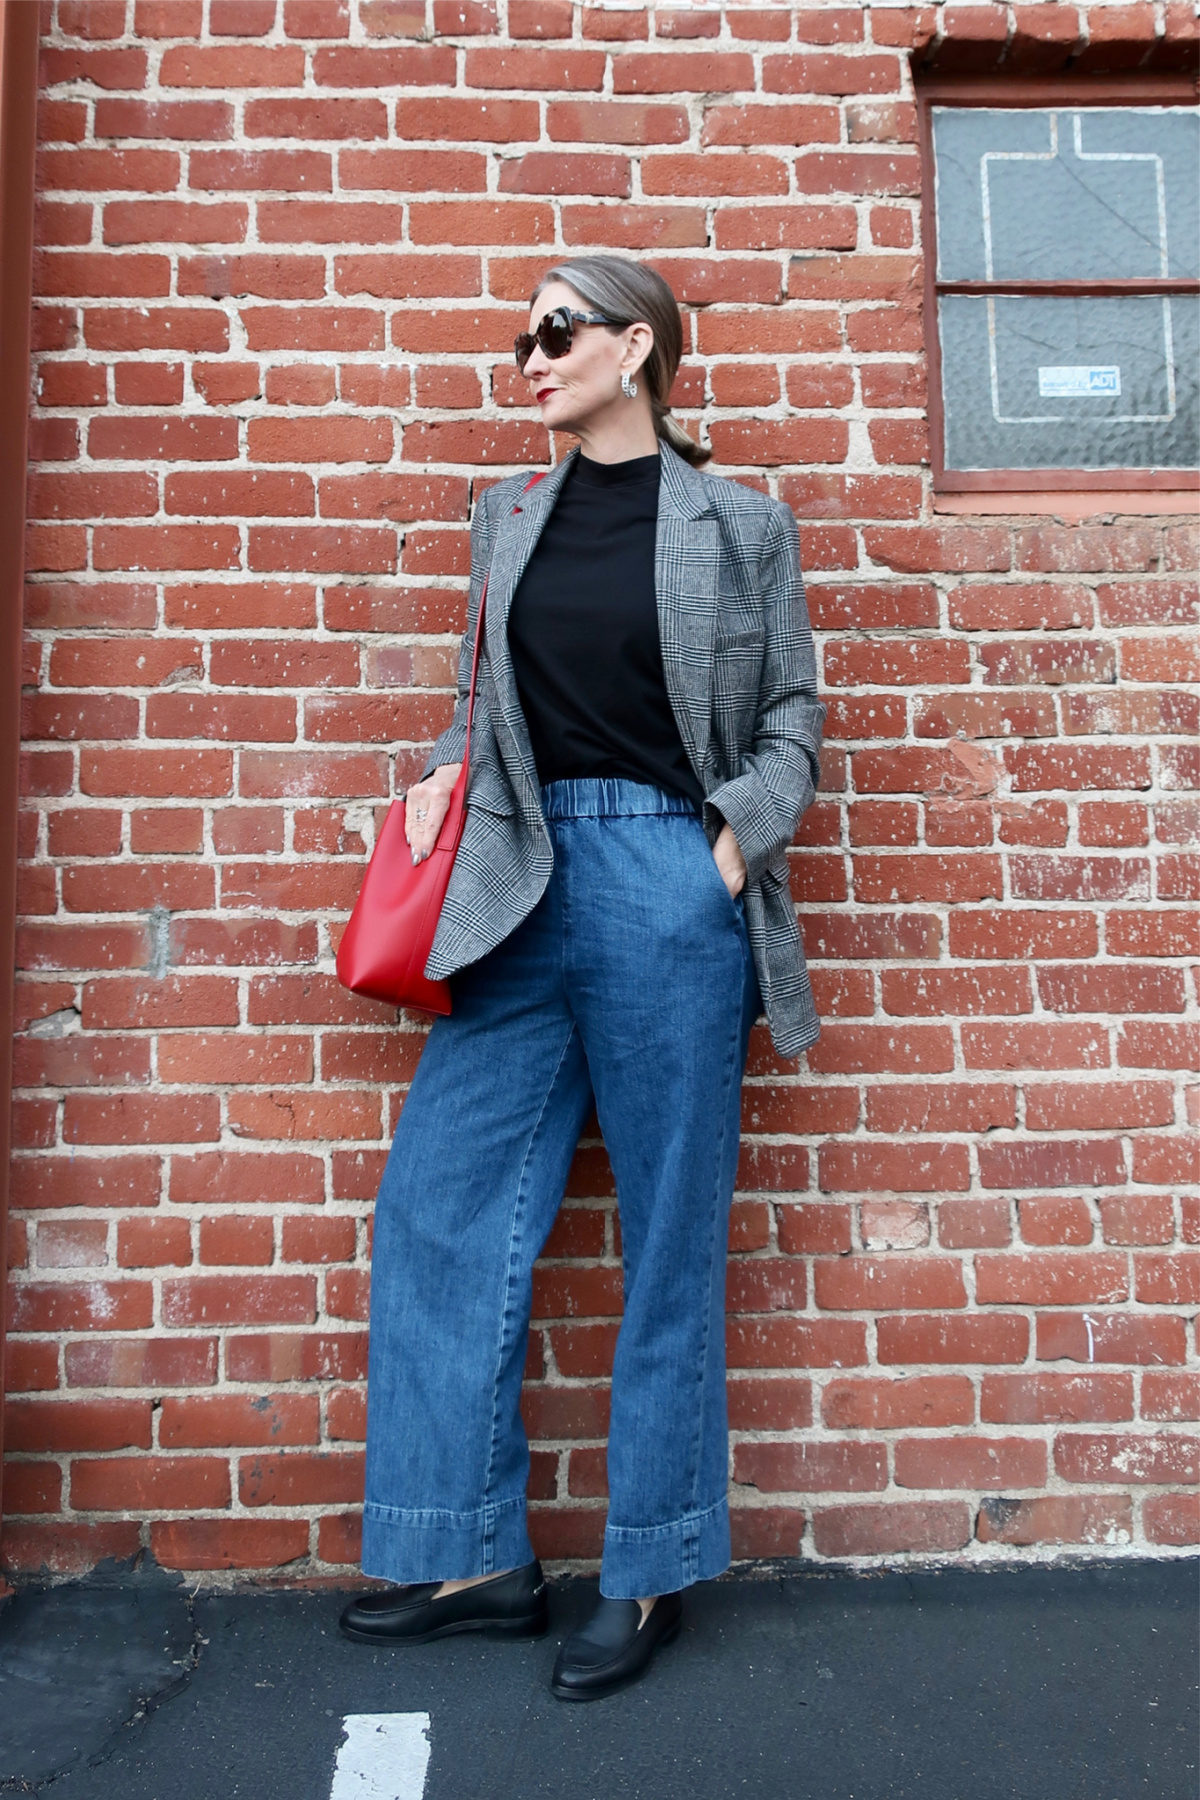 Everlane’s The Easy Jean - Fashion Should Be Fun